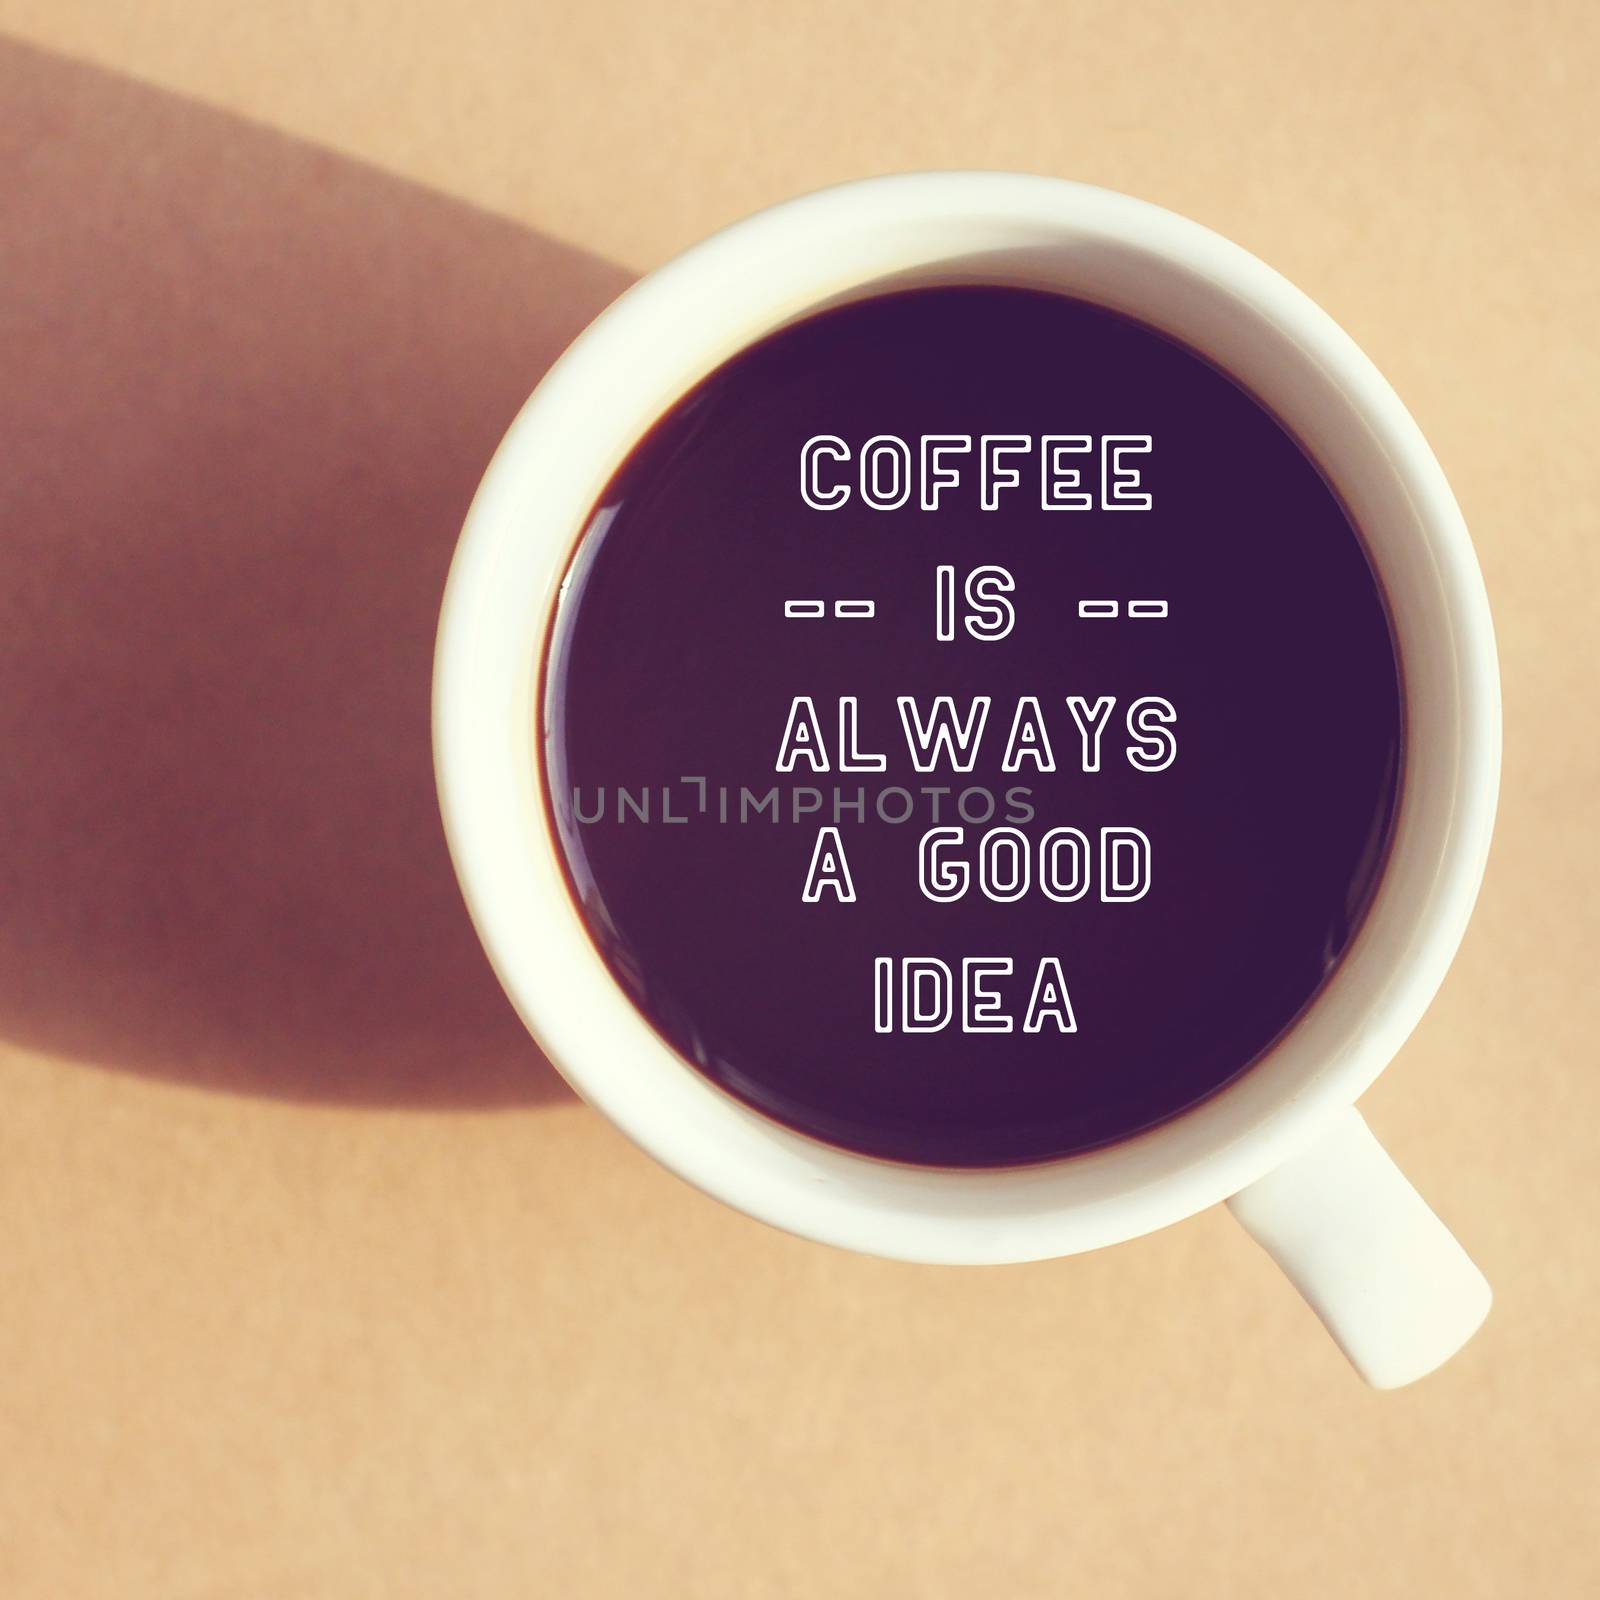 Inspirational quote on cup of coffee with retro filter effect